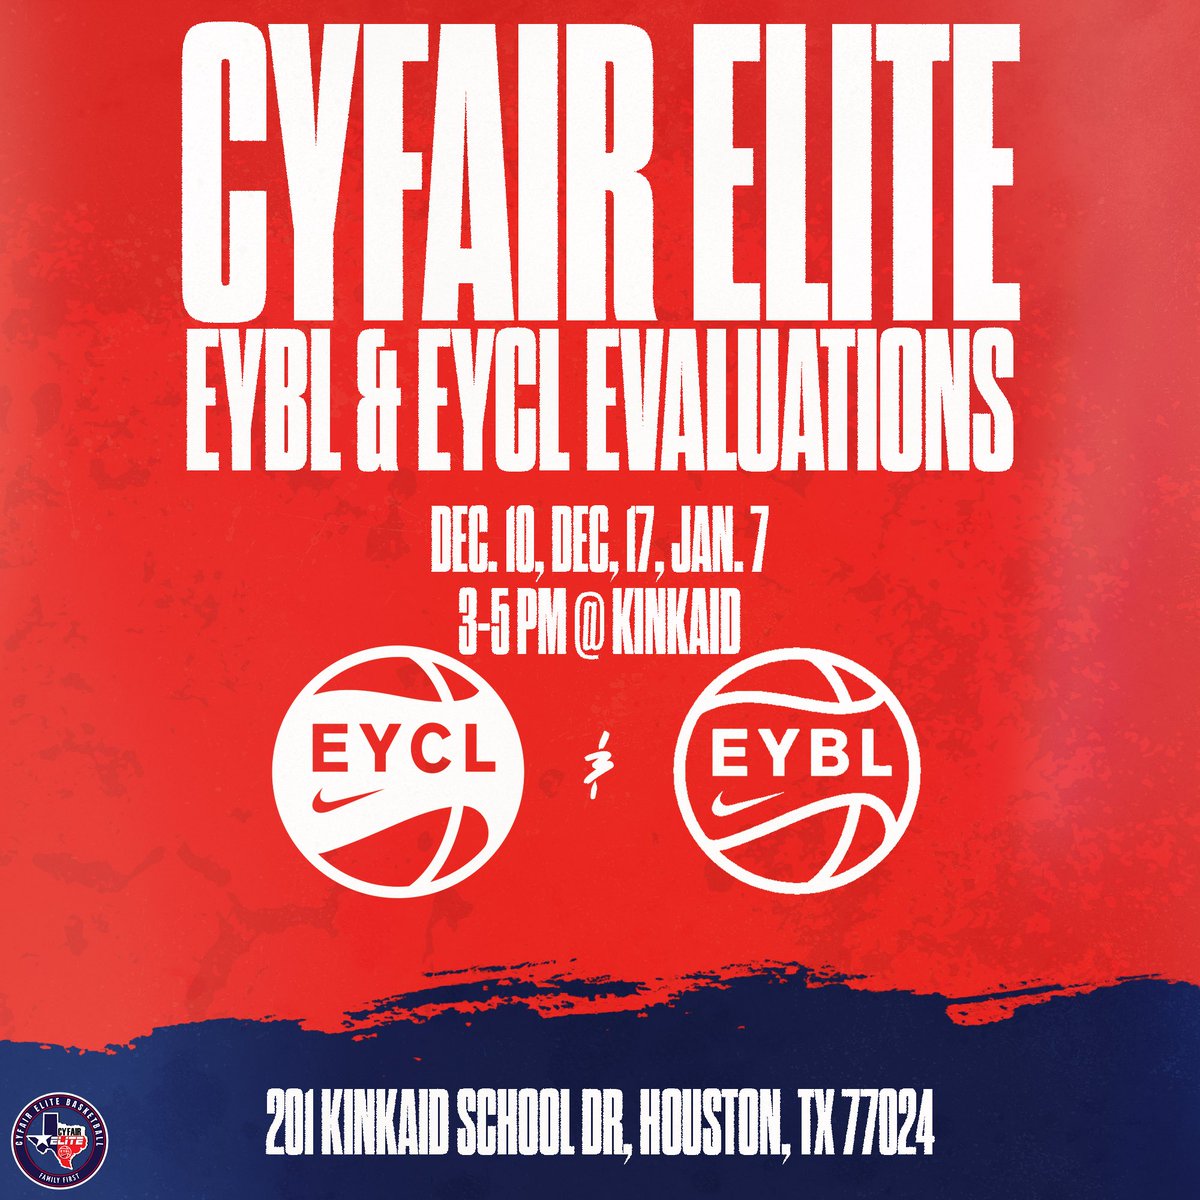 We are back! Do not miss our EYBL & EYCL evaluations! Exposure, development, and a winning culture - Take advantage of this opportunity!